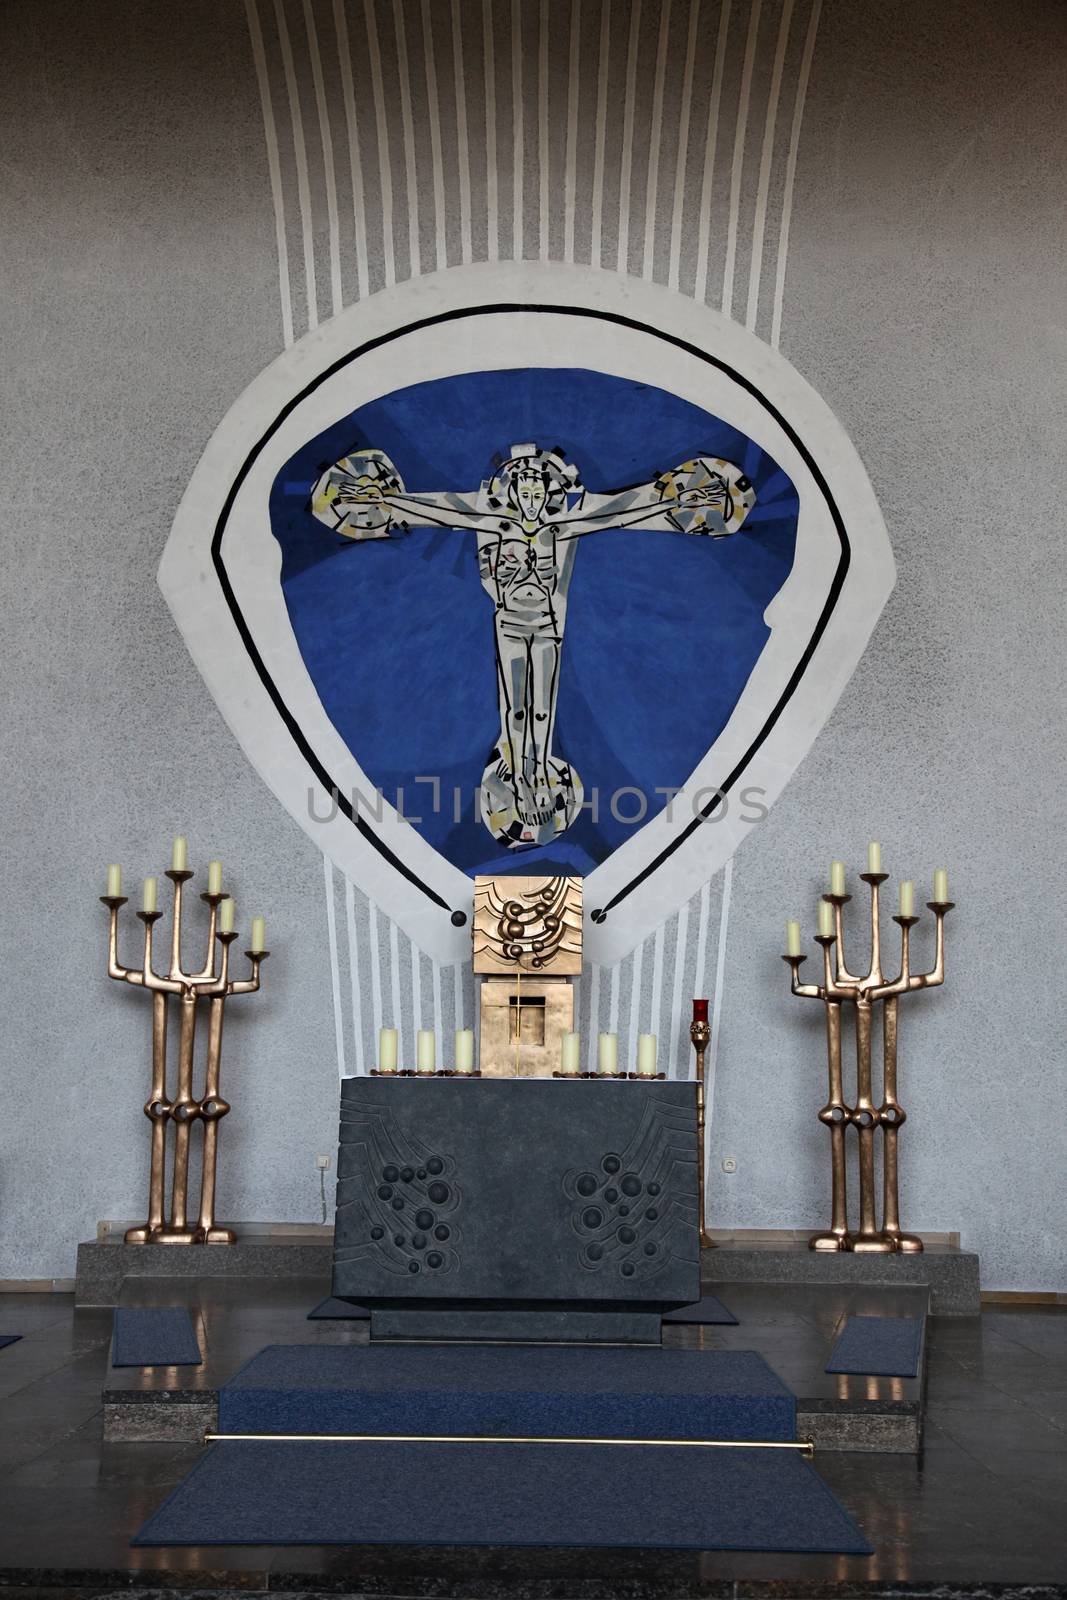 Altar in the Church of the Holy Trinity in the Bavarian village of Gemunden am Main, Germany by atlas